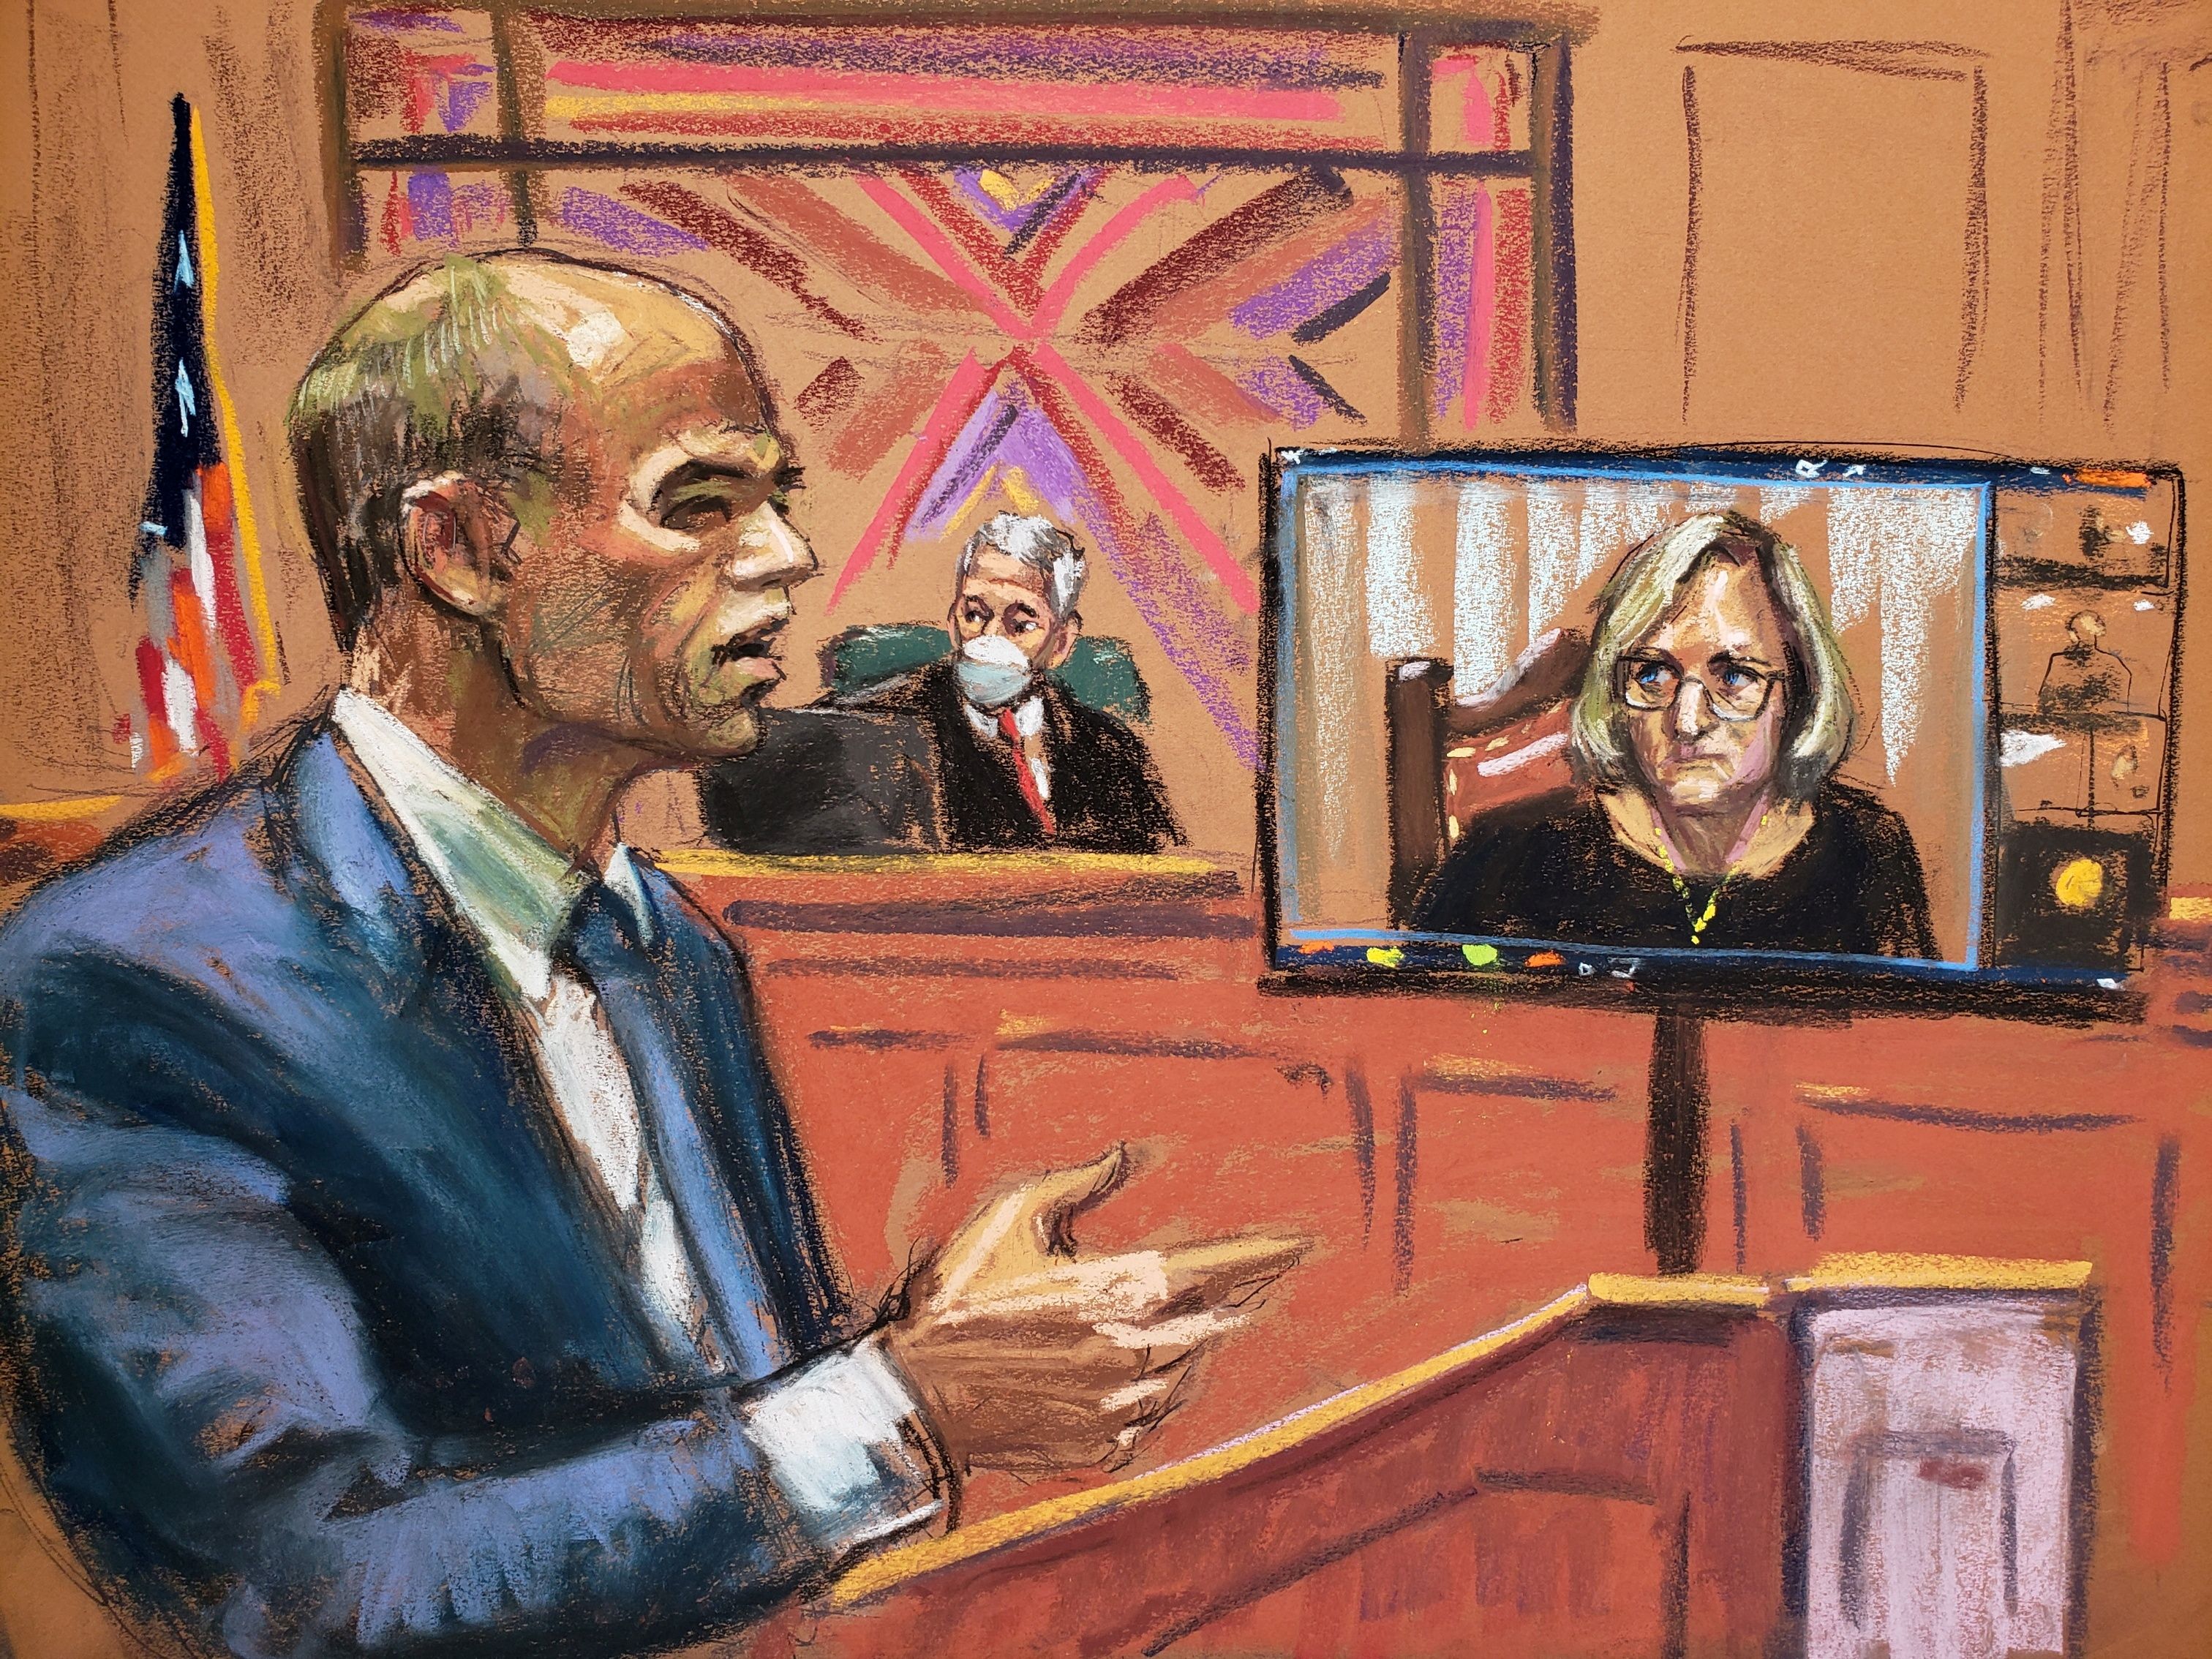 Former attorney Michael Avenatti, representing himself, questions witness Judy Regnier during his criminal trial at the United States Courthouse in the Manhattan borough of New York City on Tuesday